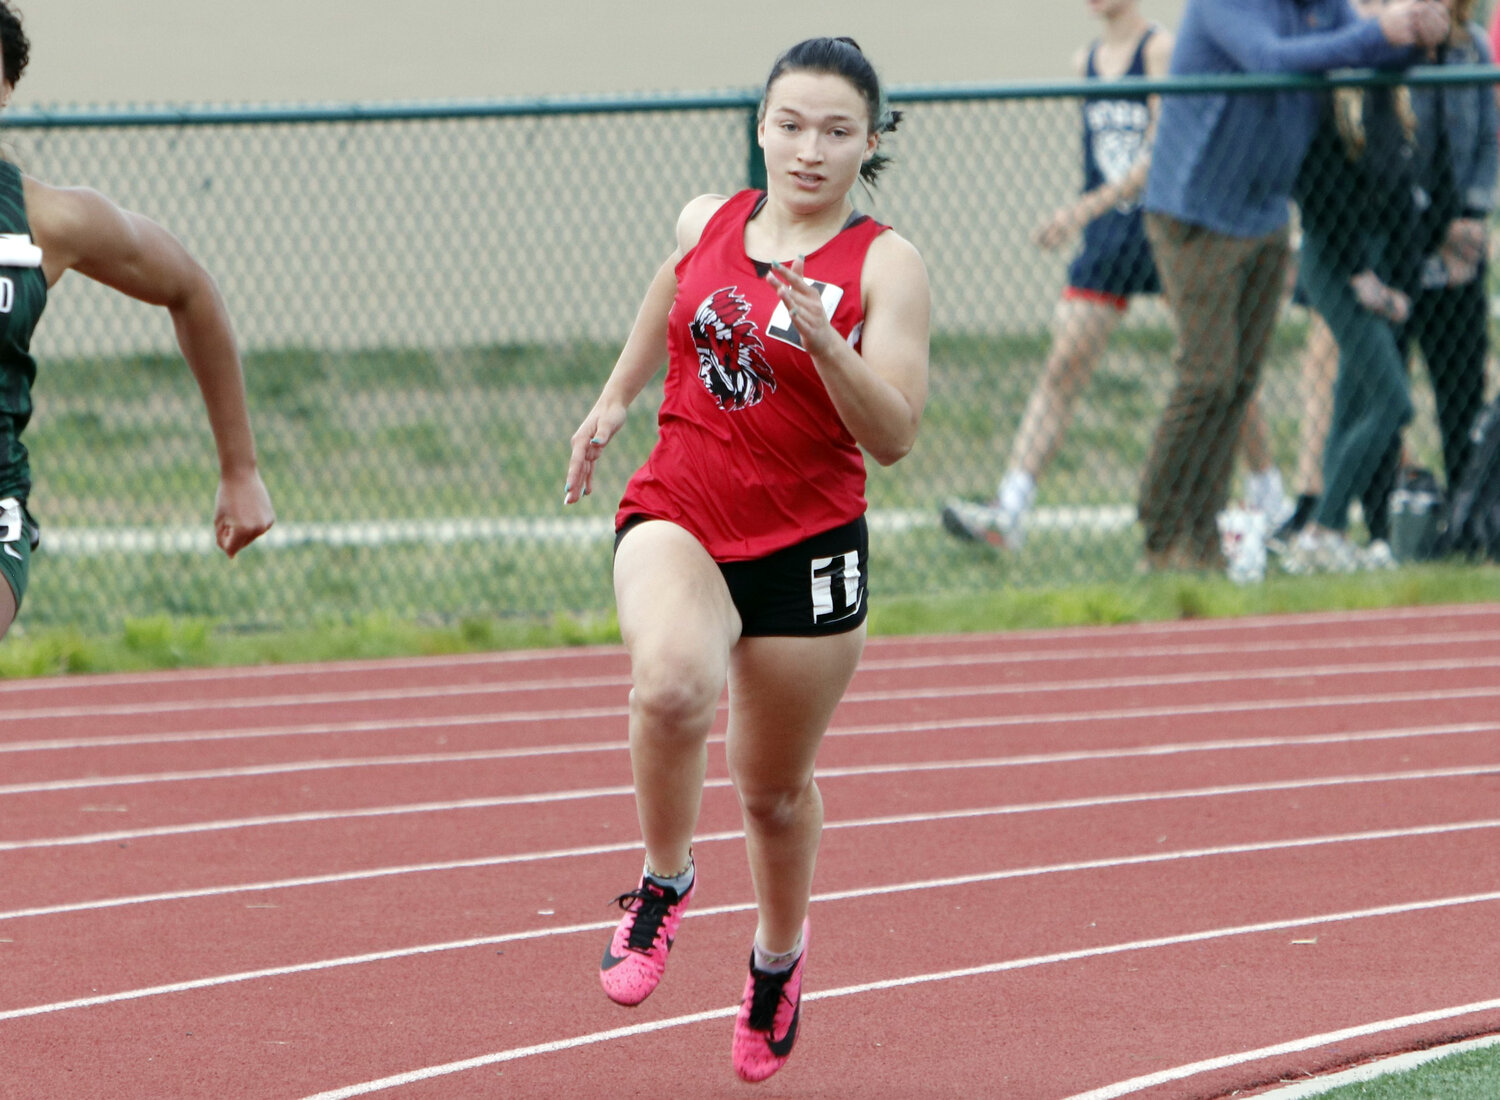 Kylie Overkamp runs towards the finish line during the 200-meter dash competition.